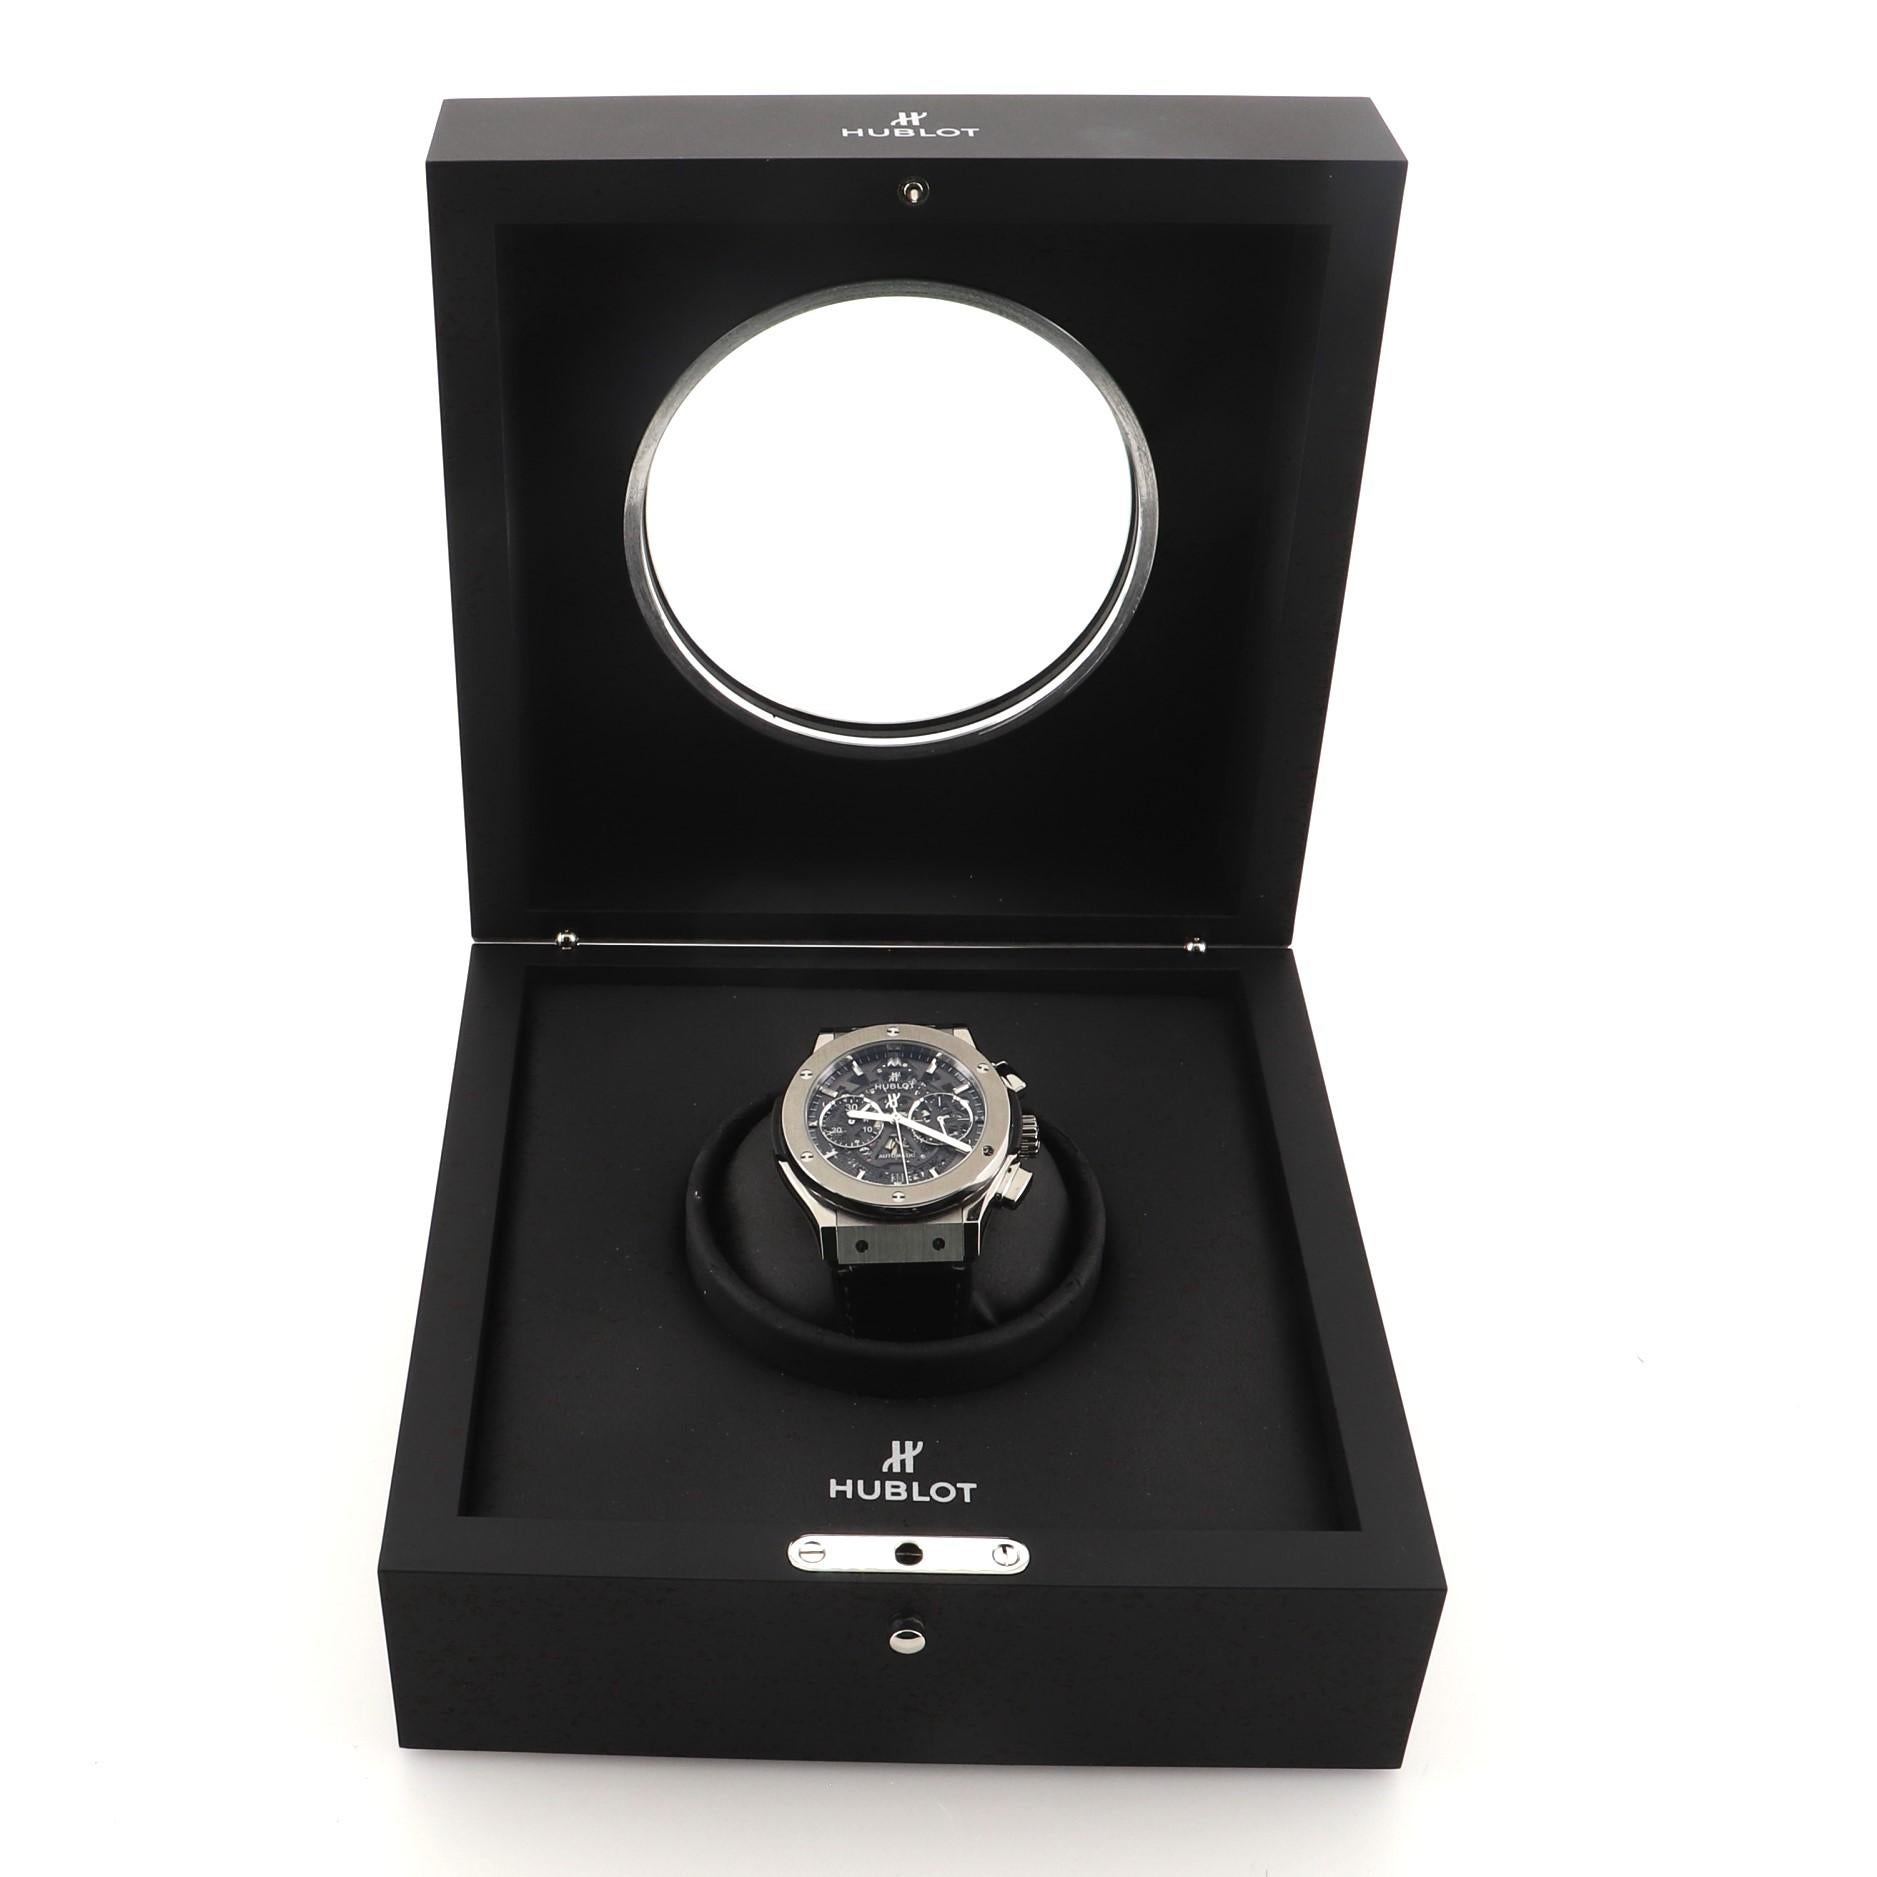 This item can only be shipped within the United States.

Estimated Retail Price: $15,100
Condition: Great. Indentations and wear on strap faint scratches on hardware.
Accessories: Box
Measurements: Case Size/Width: 45mm, Watch Height: 14mm, Band